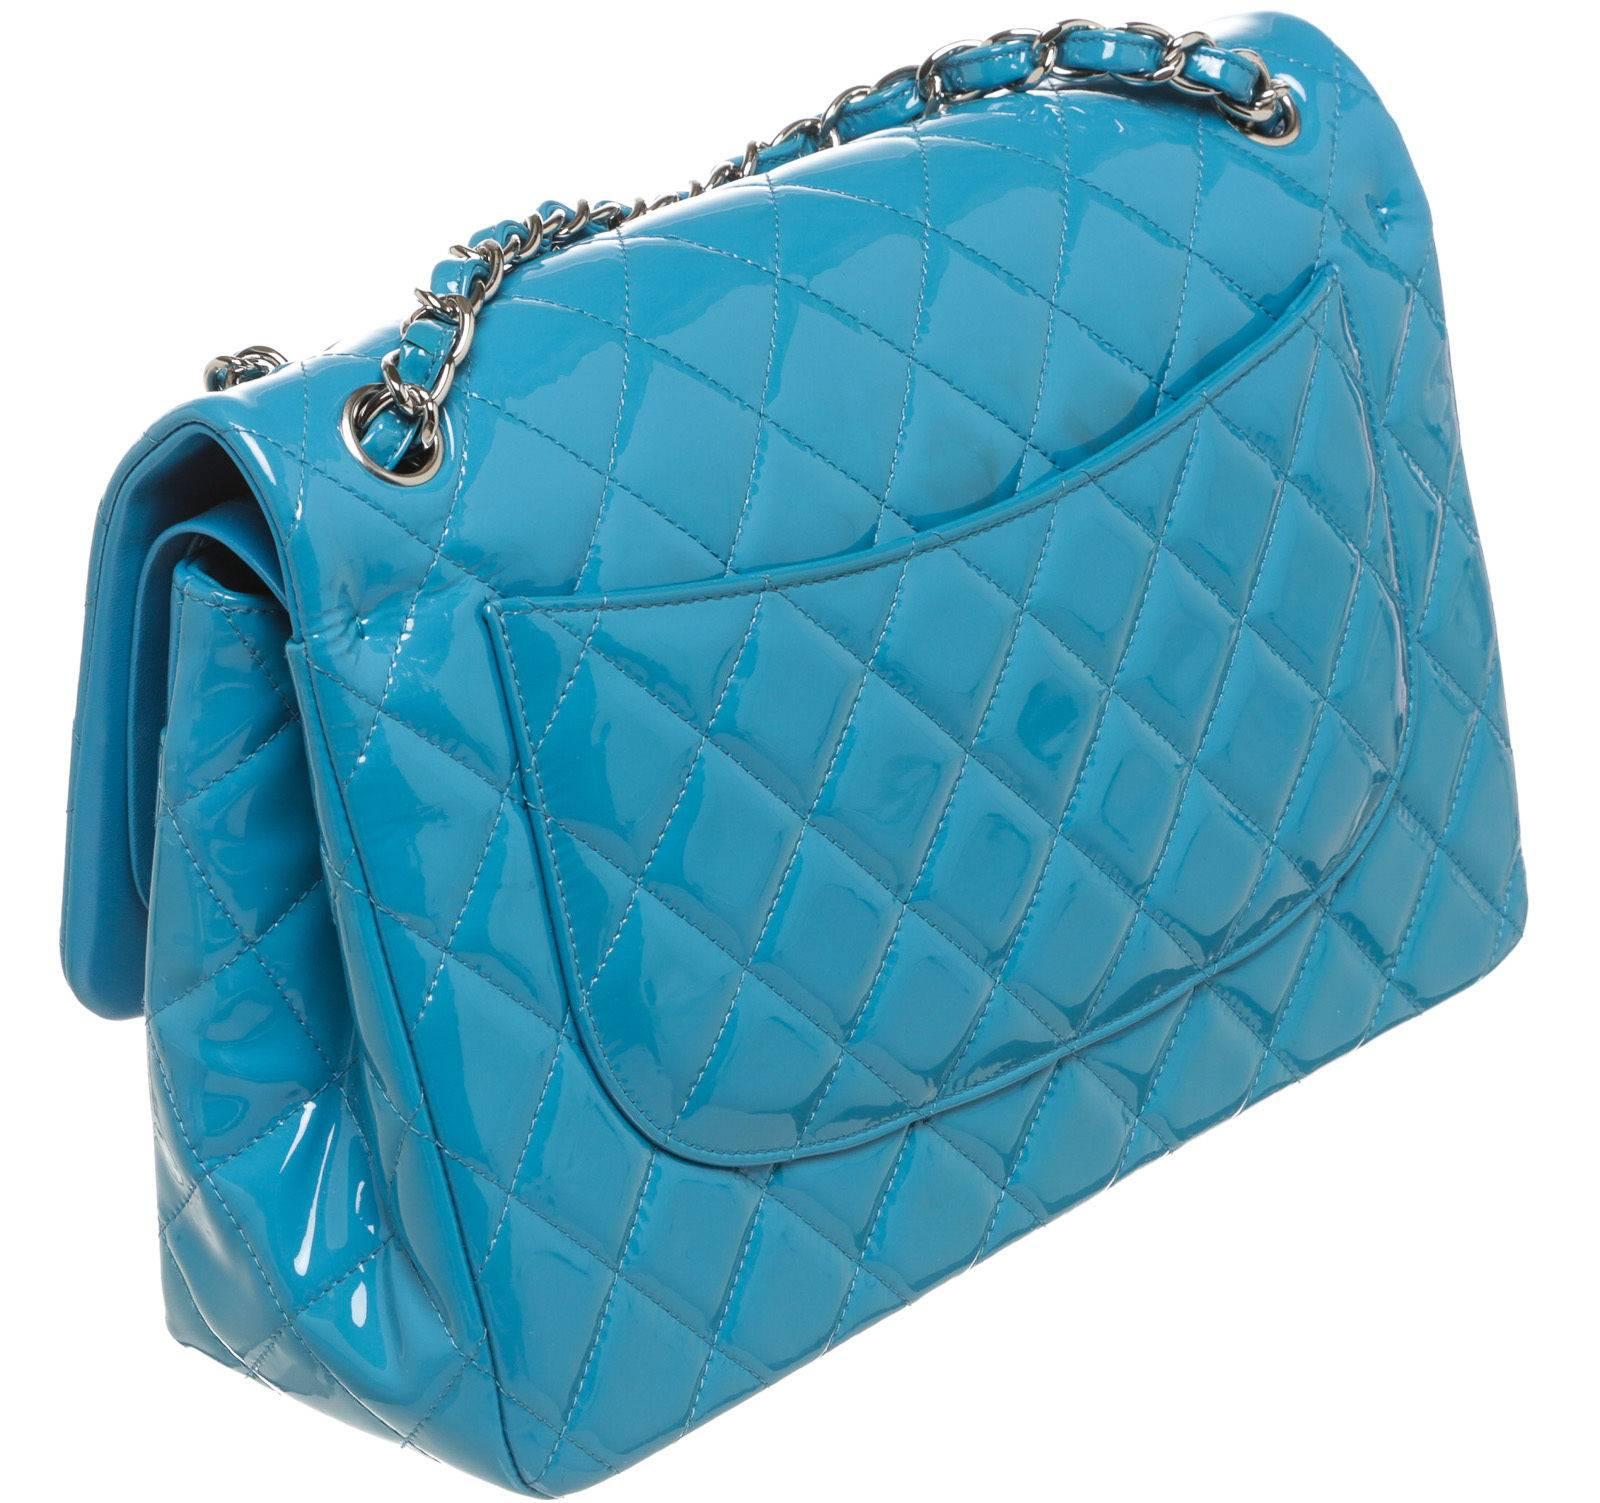 Chanel Blue Quilted Patent Leather Jumbo Flap Shoulder Handbag In Good Condition For Sale In Corona Del Mar, CA